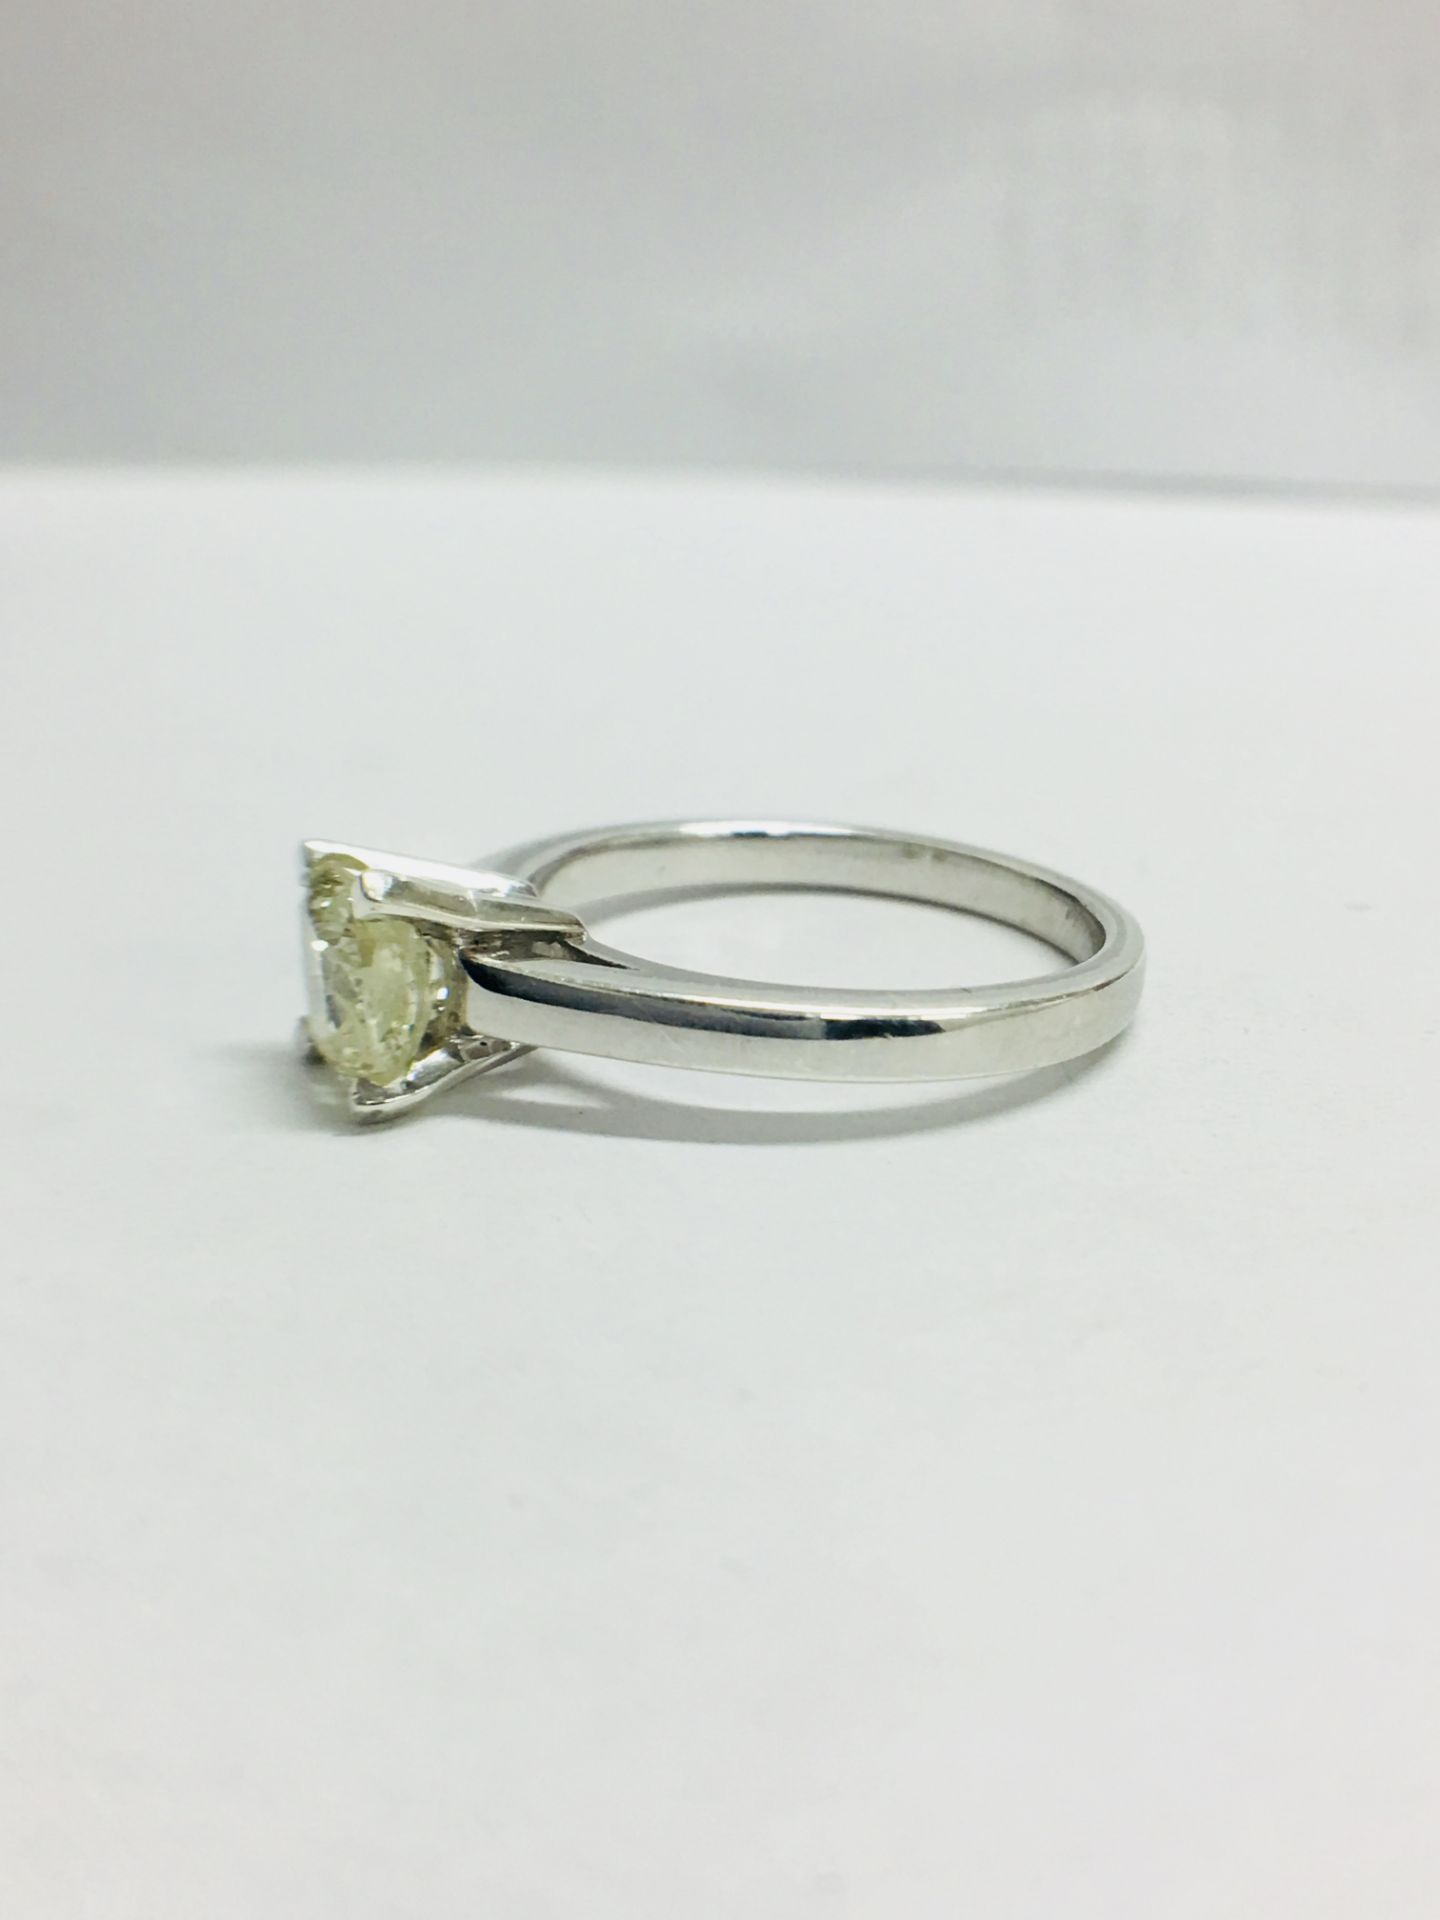 1.00ct diamond solitaire ring with a Cushion cut diamond. J colour and I1 clarity enhanced stone. - Image 3 of 7